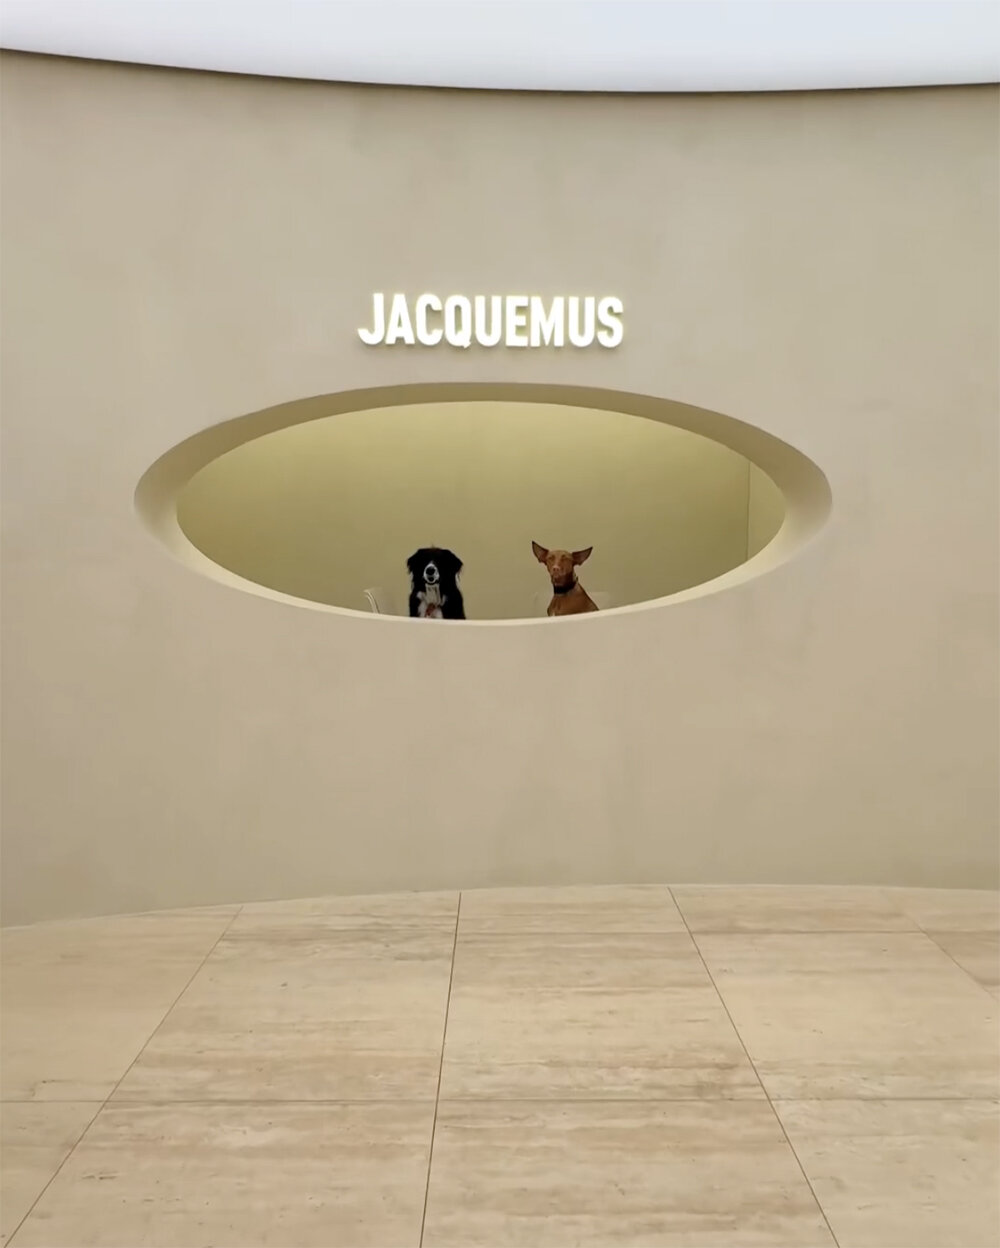 enter jacquemus' art-filled office designed by OMA in Paris